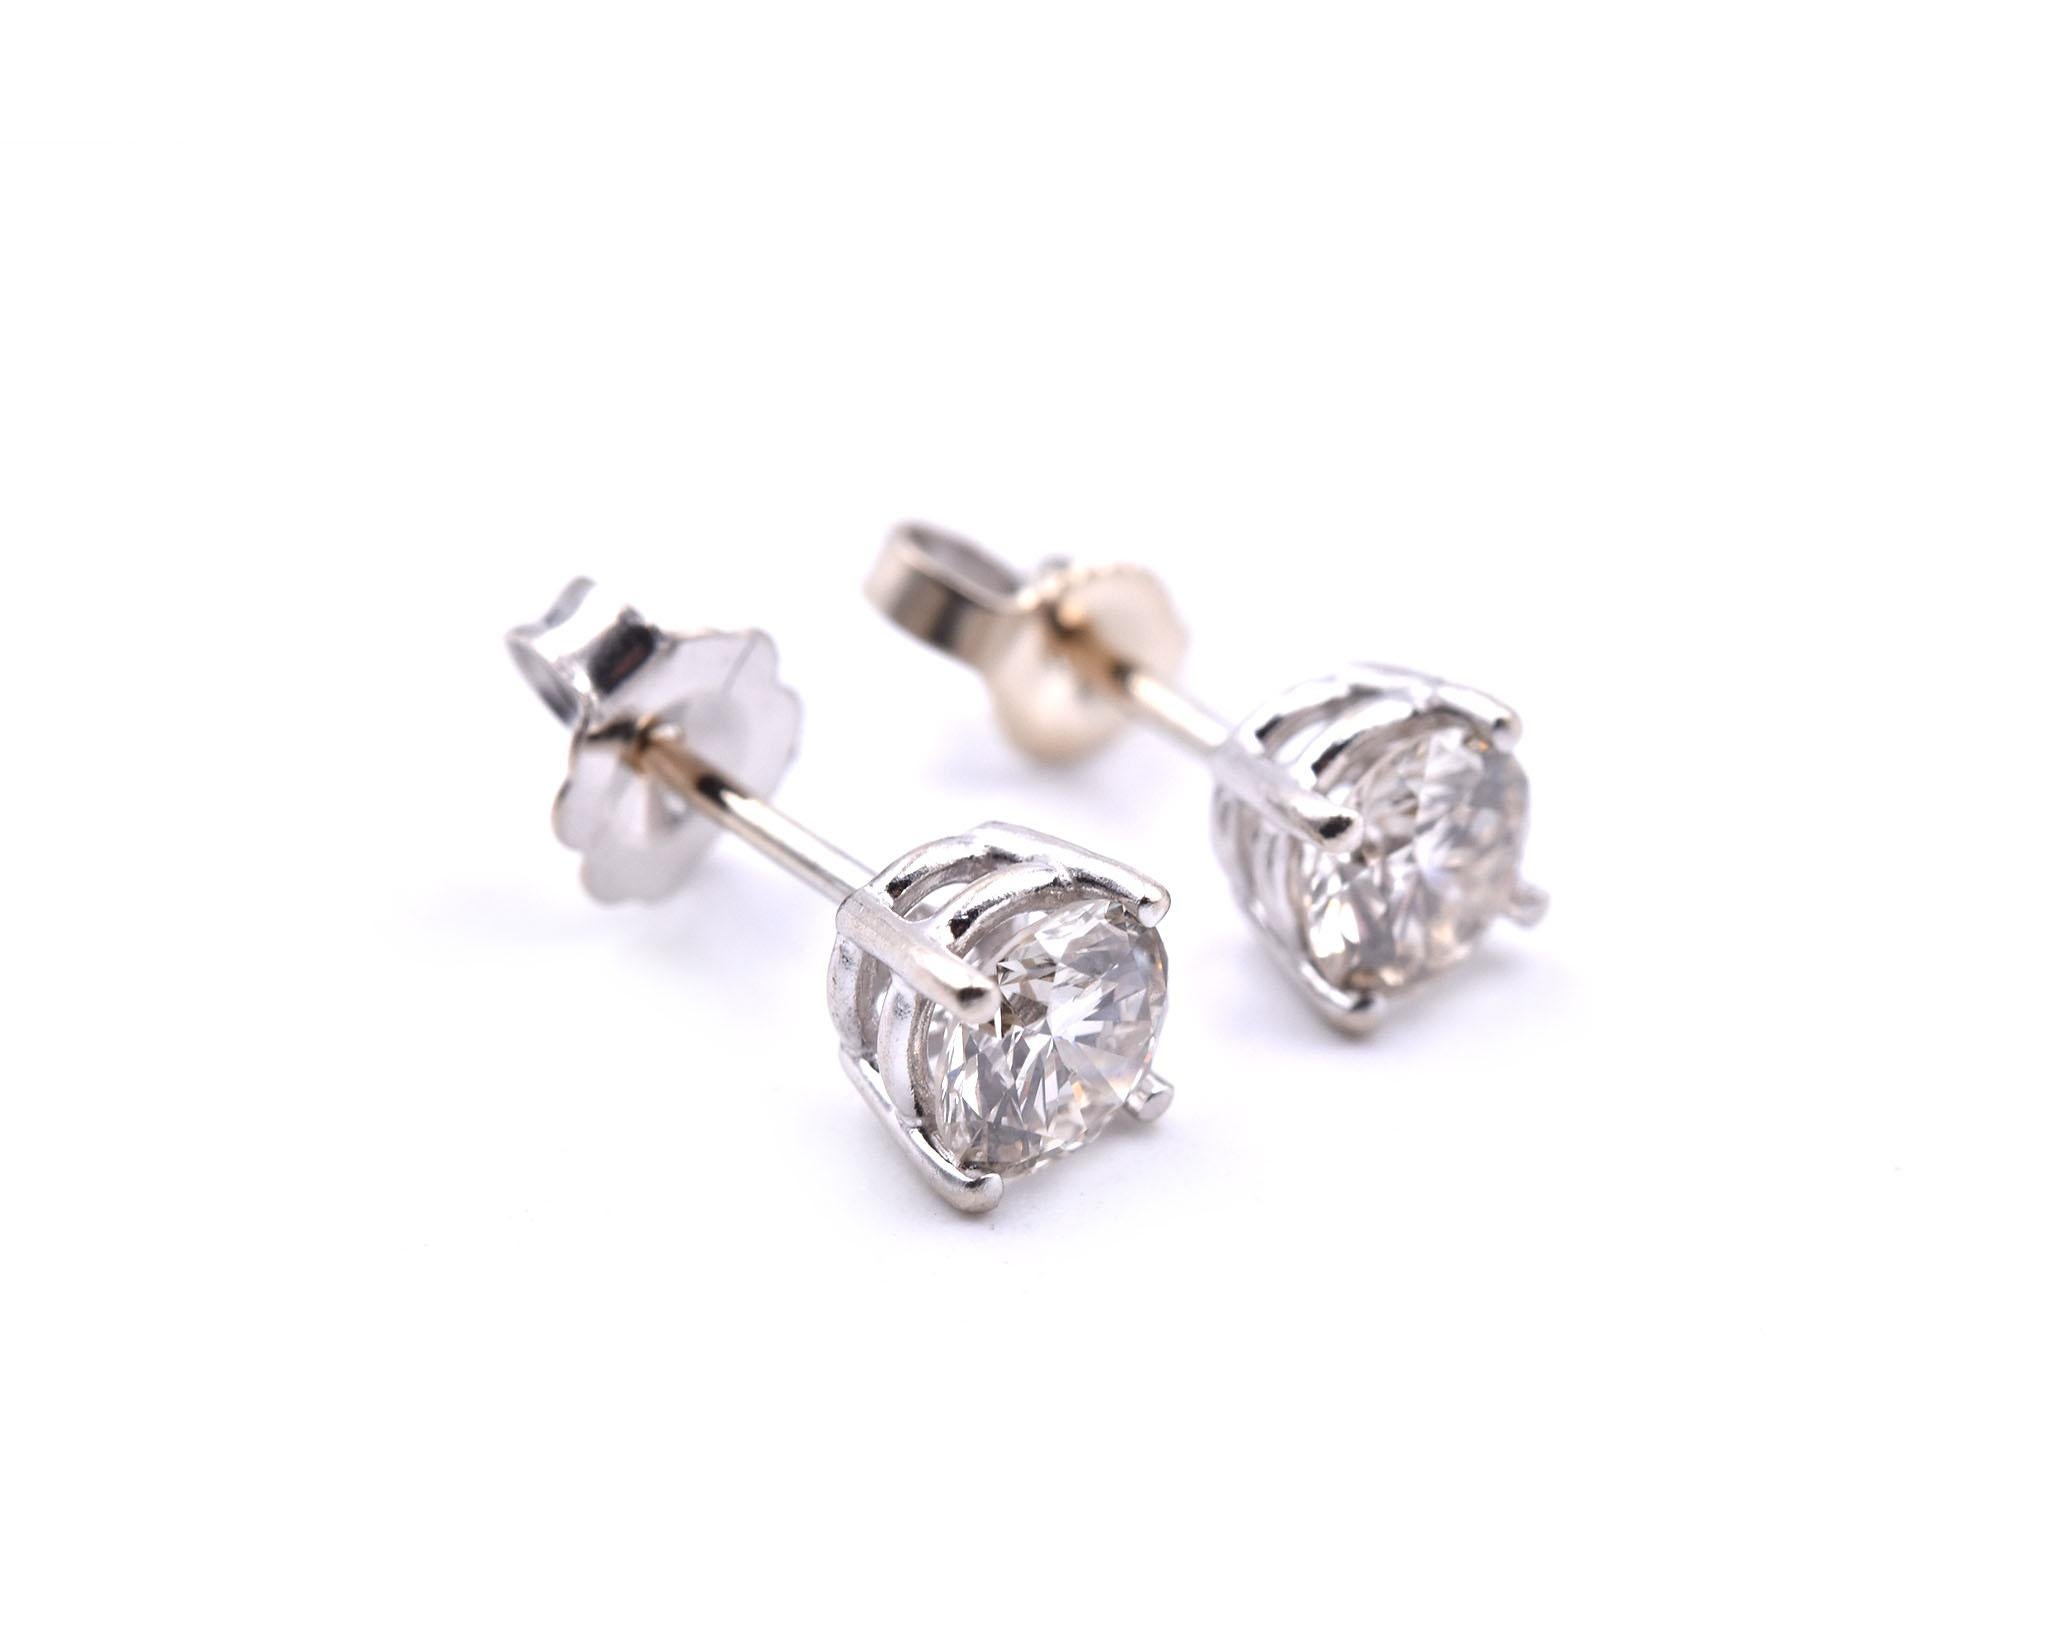 
Designer: custom design
Material: 14k white gold
Diamonds: two round brilliant cut = 1.00cttw
Color: I
Clarity: VS2-SI1
Dimensions: earrings are approximately 5.10mm by 5.08mm
Fastenings: post with friction-back
Weight: 1.17 grams
